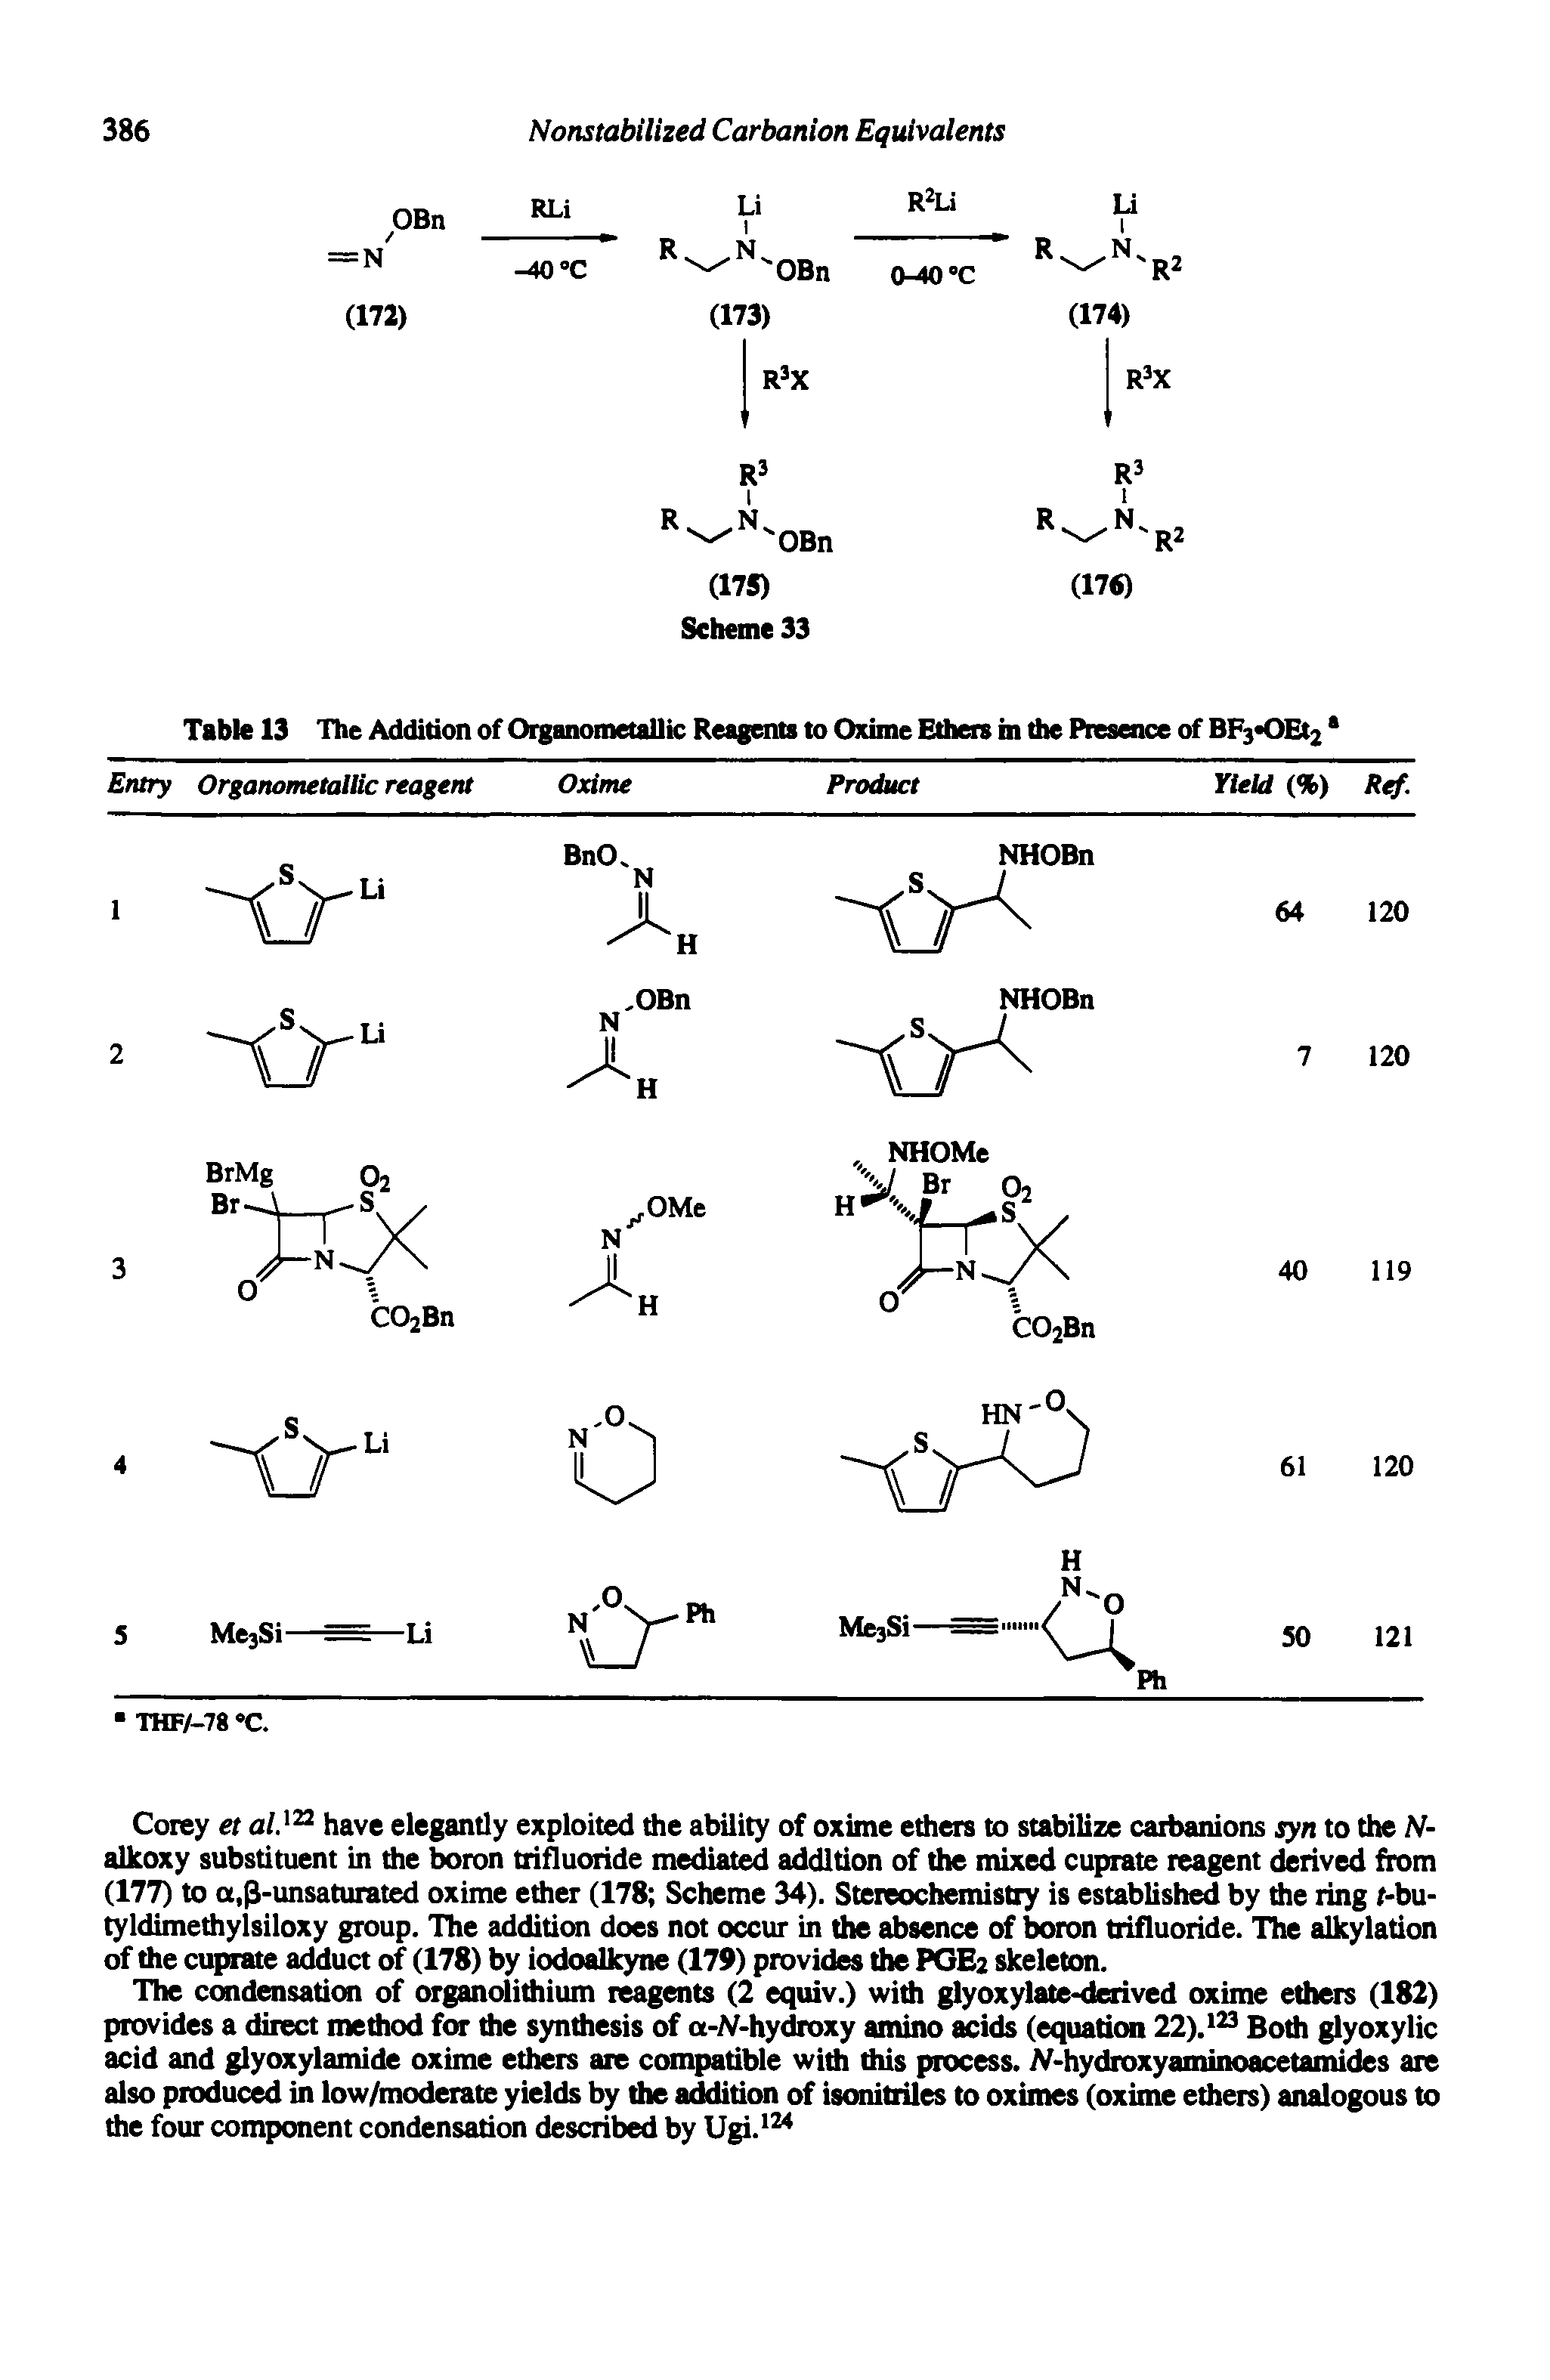 Table 13 The Addition of Organometallic Reagents to Oxime Ethers in die Presence of BF3 OEt2 ...